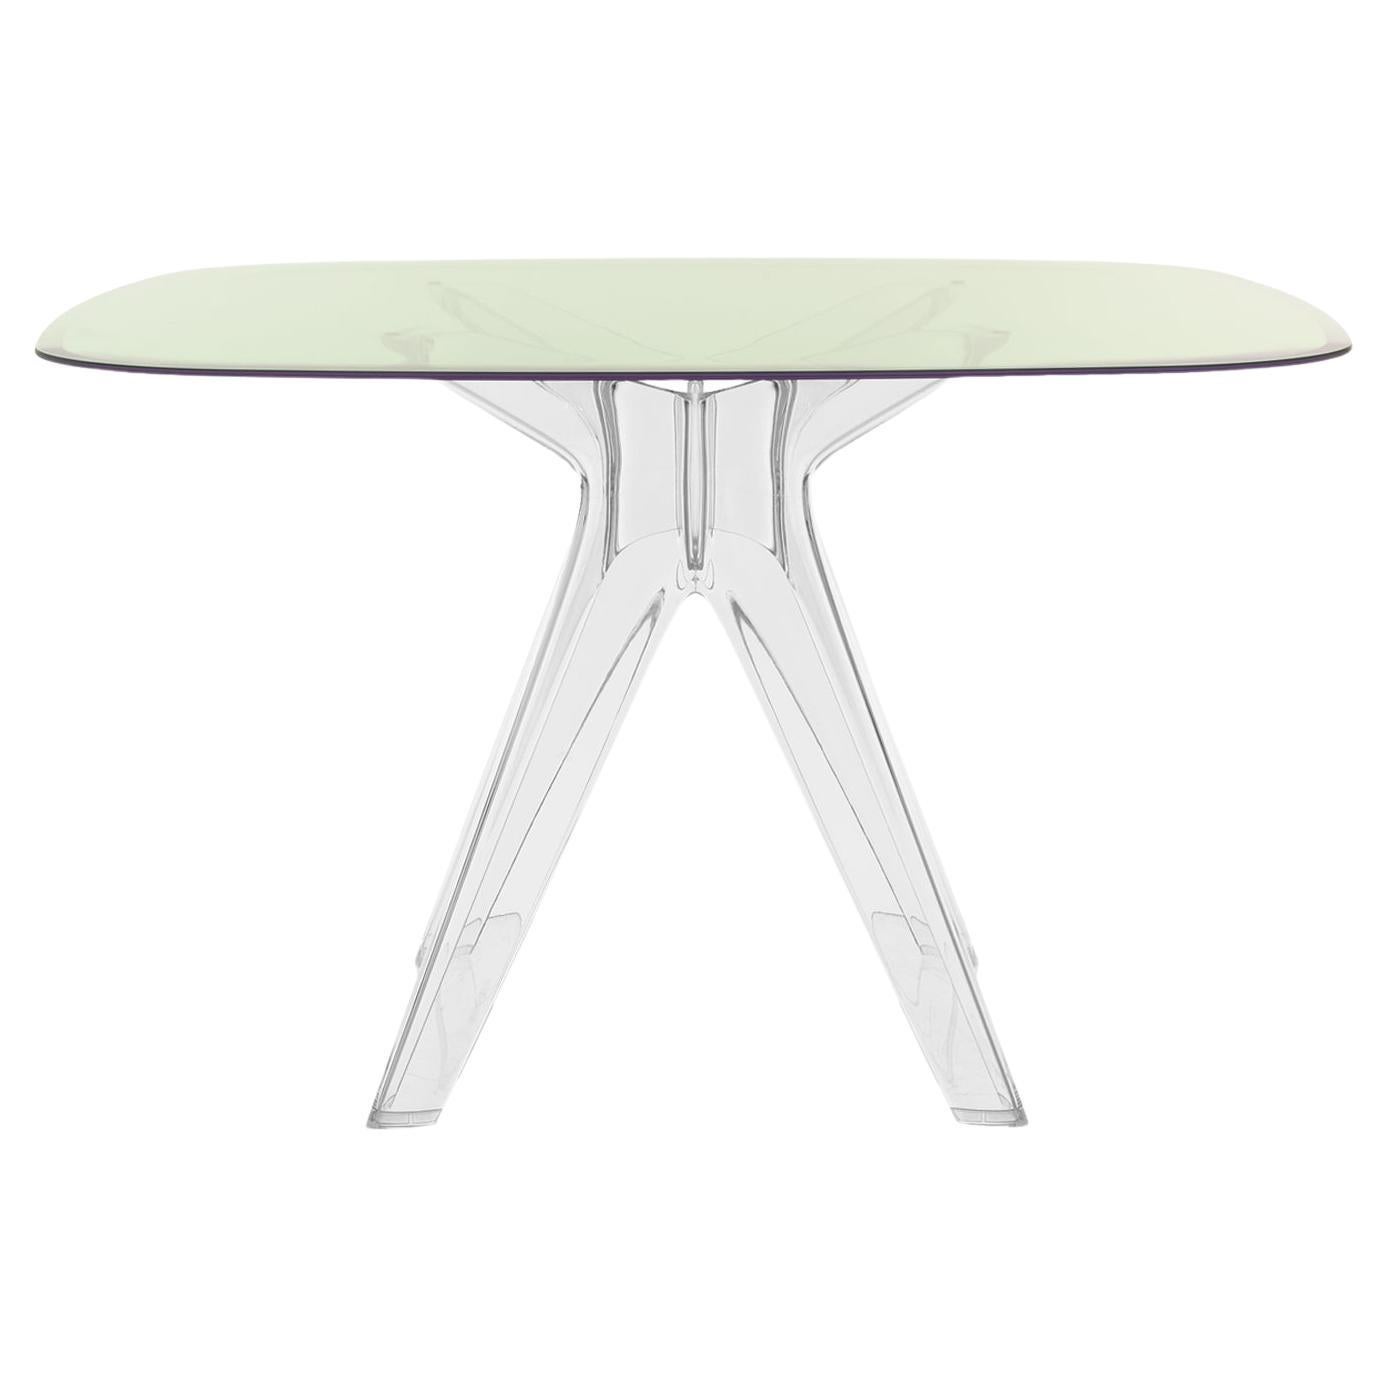 Kartell Sir Gio Square Coffee Table with Green Top by Philippe Starck